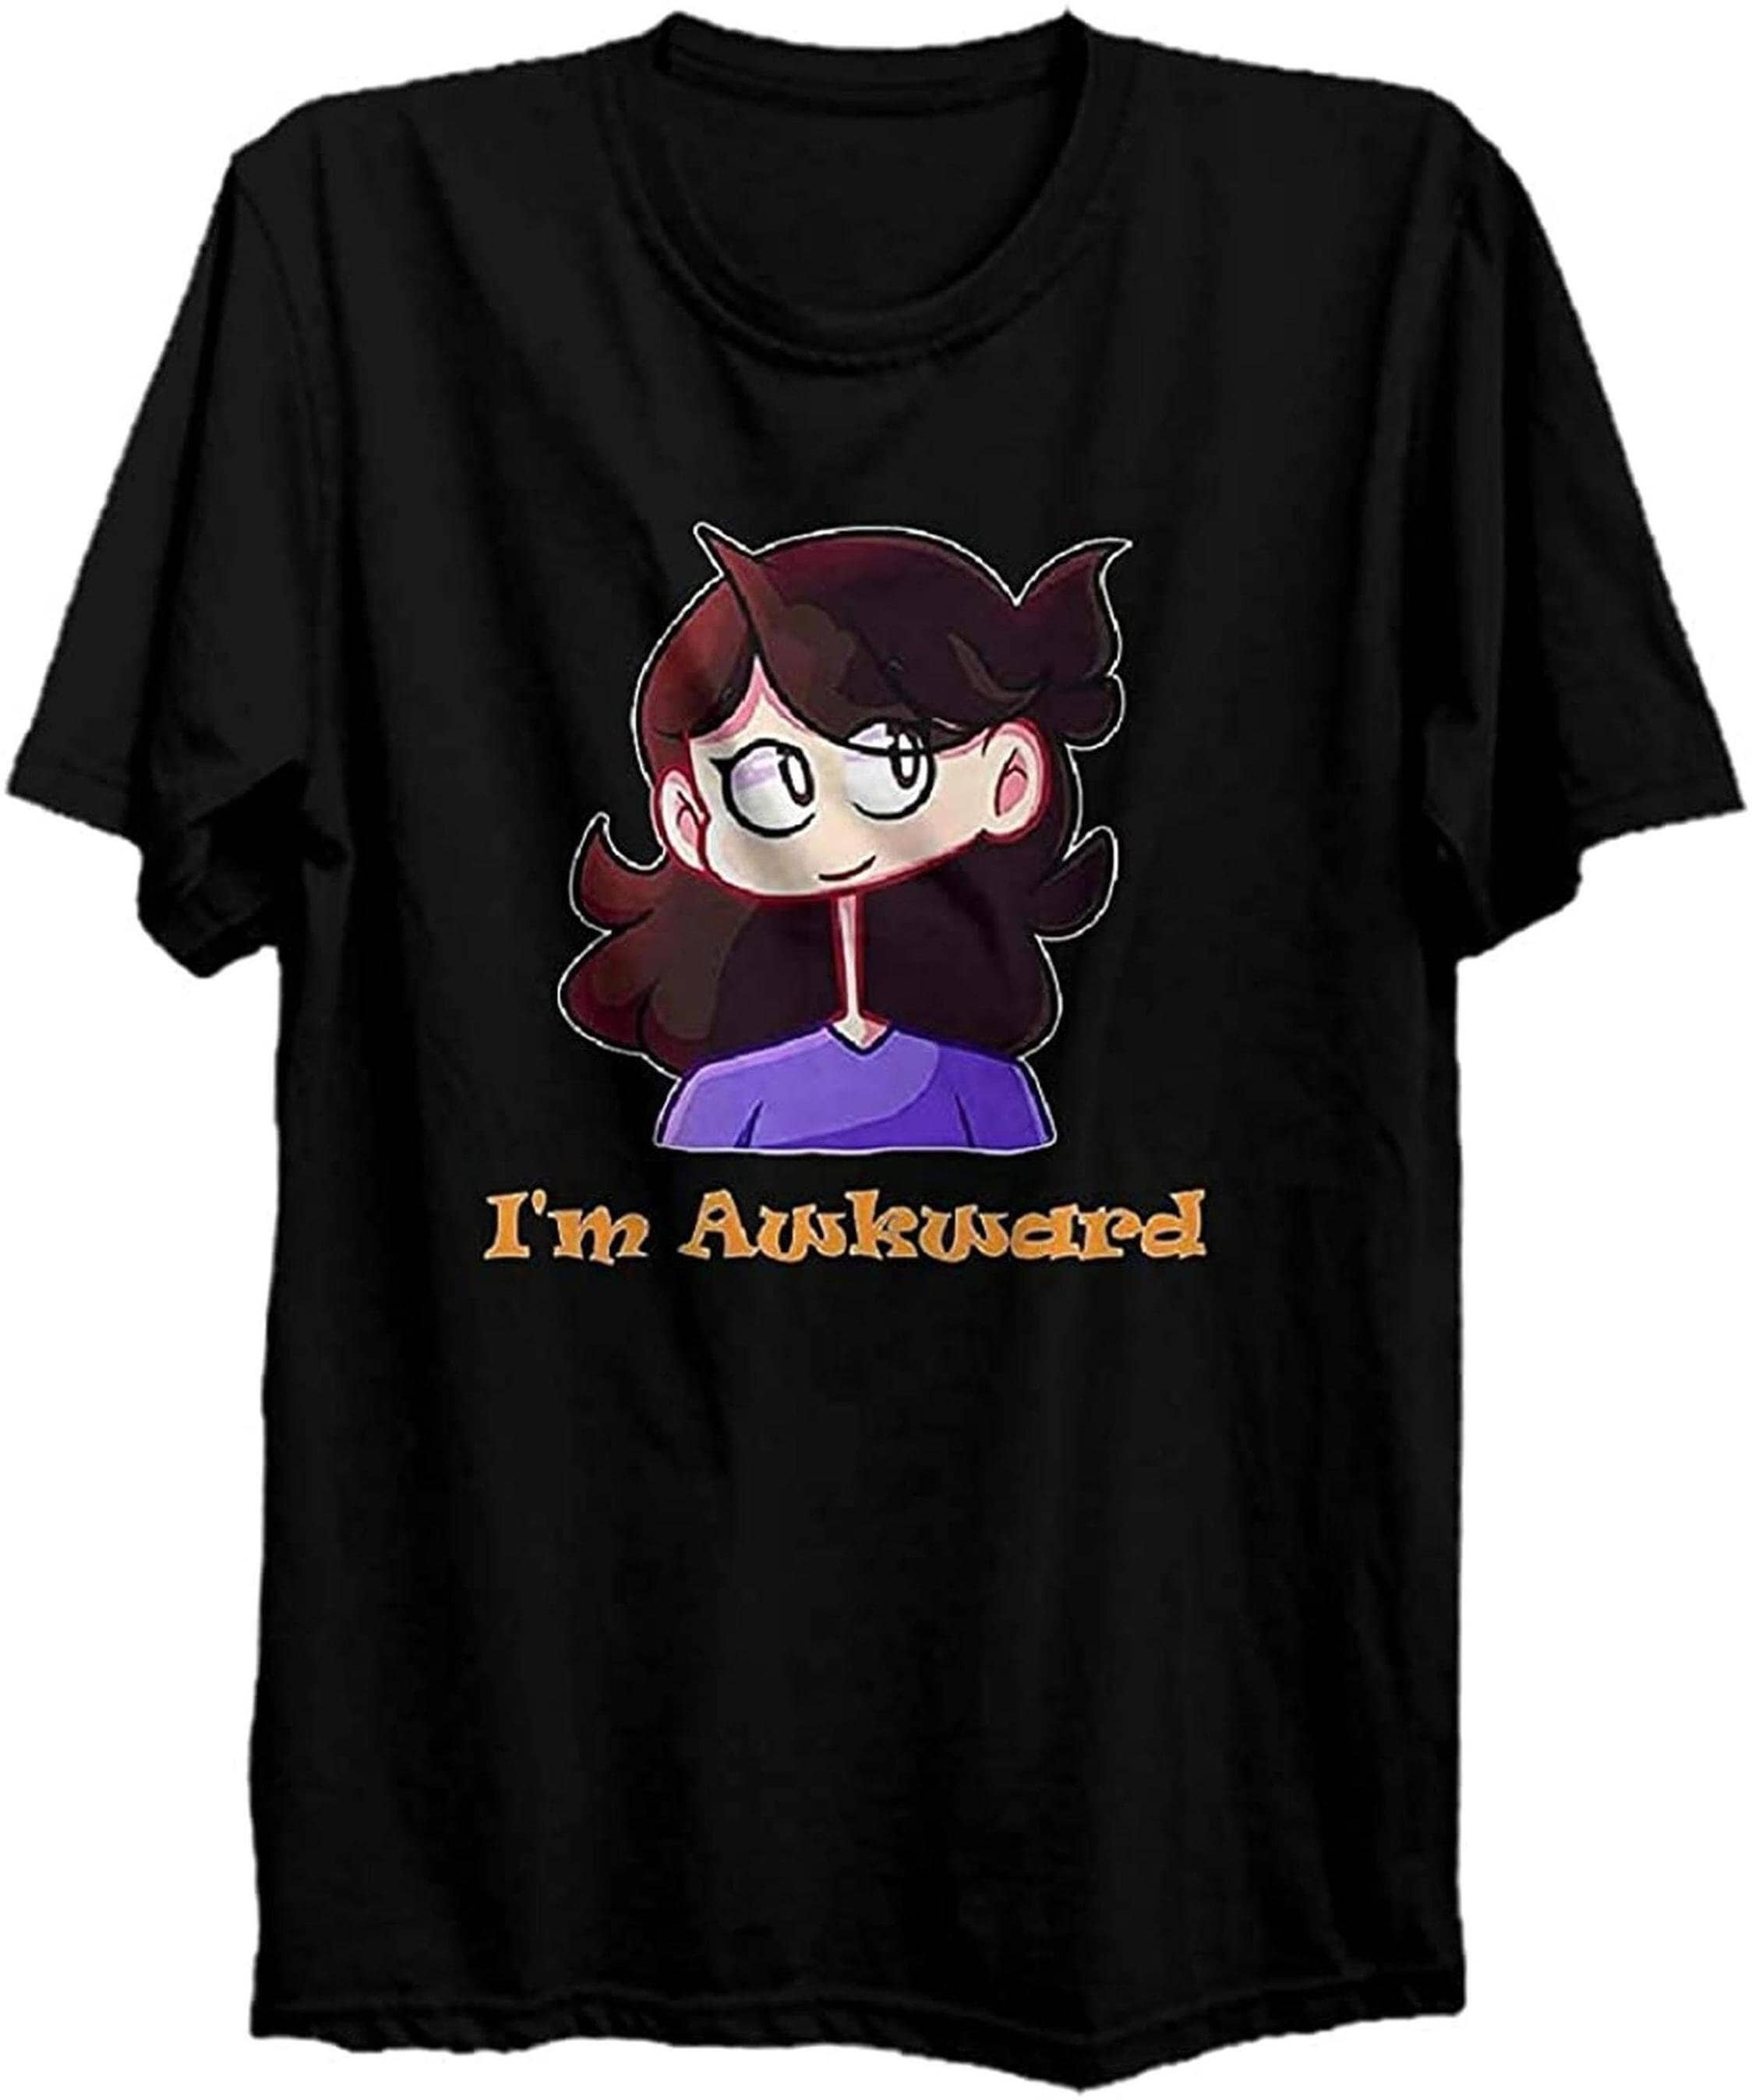 g3 JaidenAnimations Official merchandise for  creator Jaiden  Animations It's official. iFunny vs. VonstheGOAT is happening - It's  official. iFunny vs. VonstheGOAT is happening - iFunny Brazil